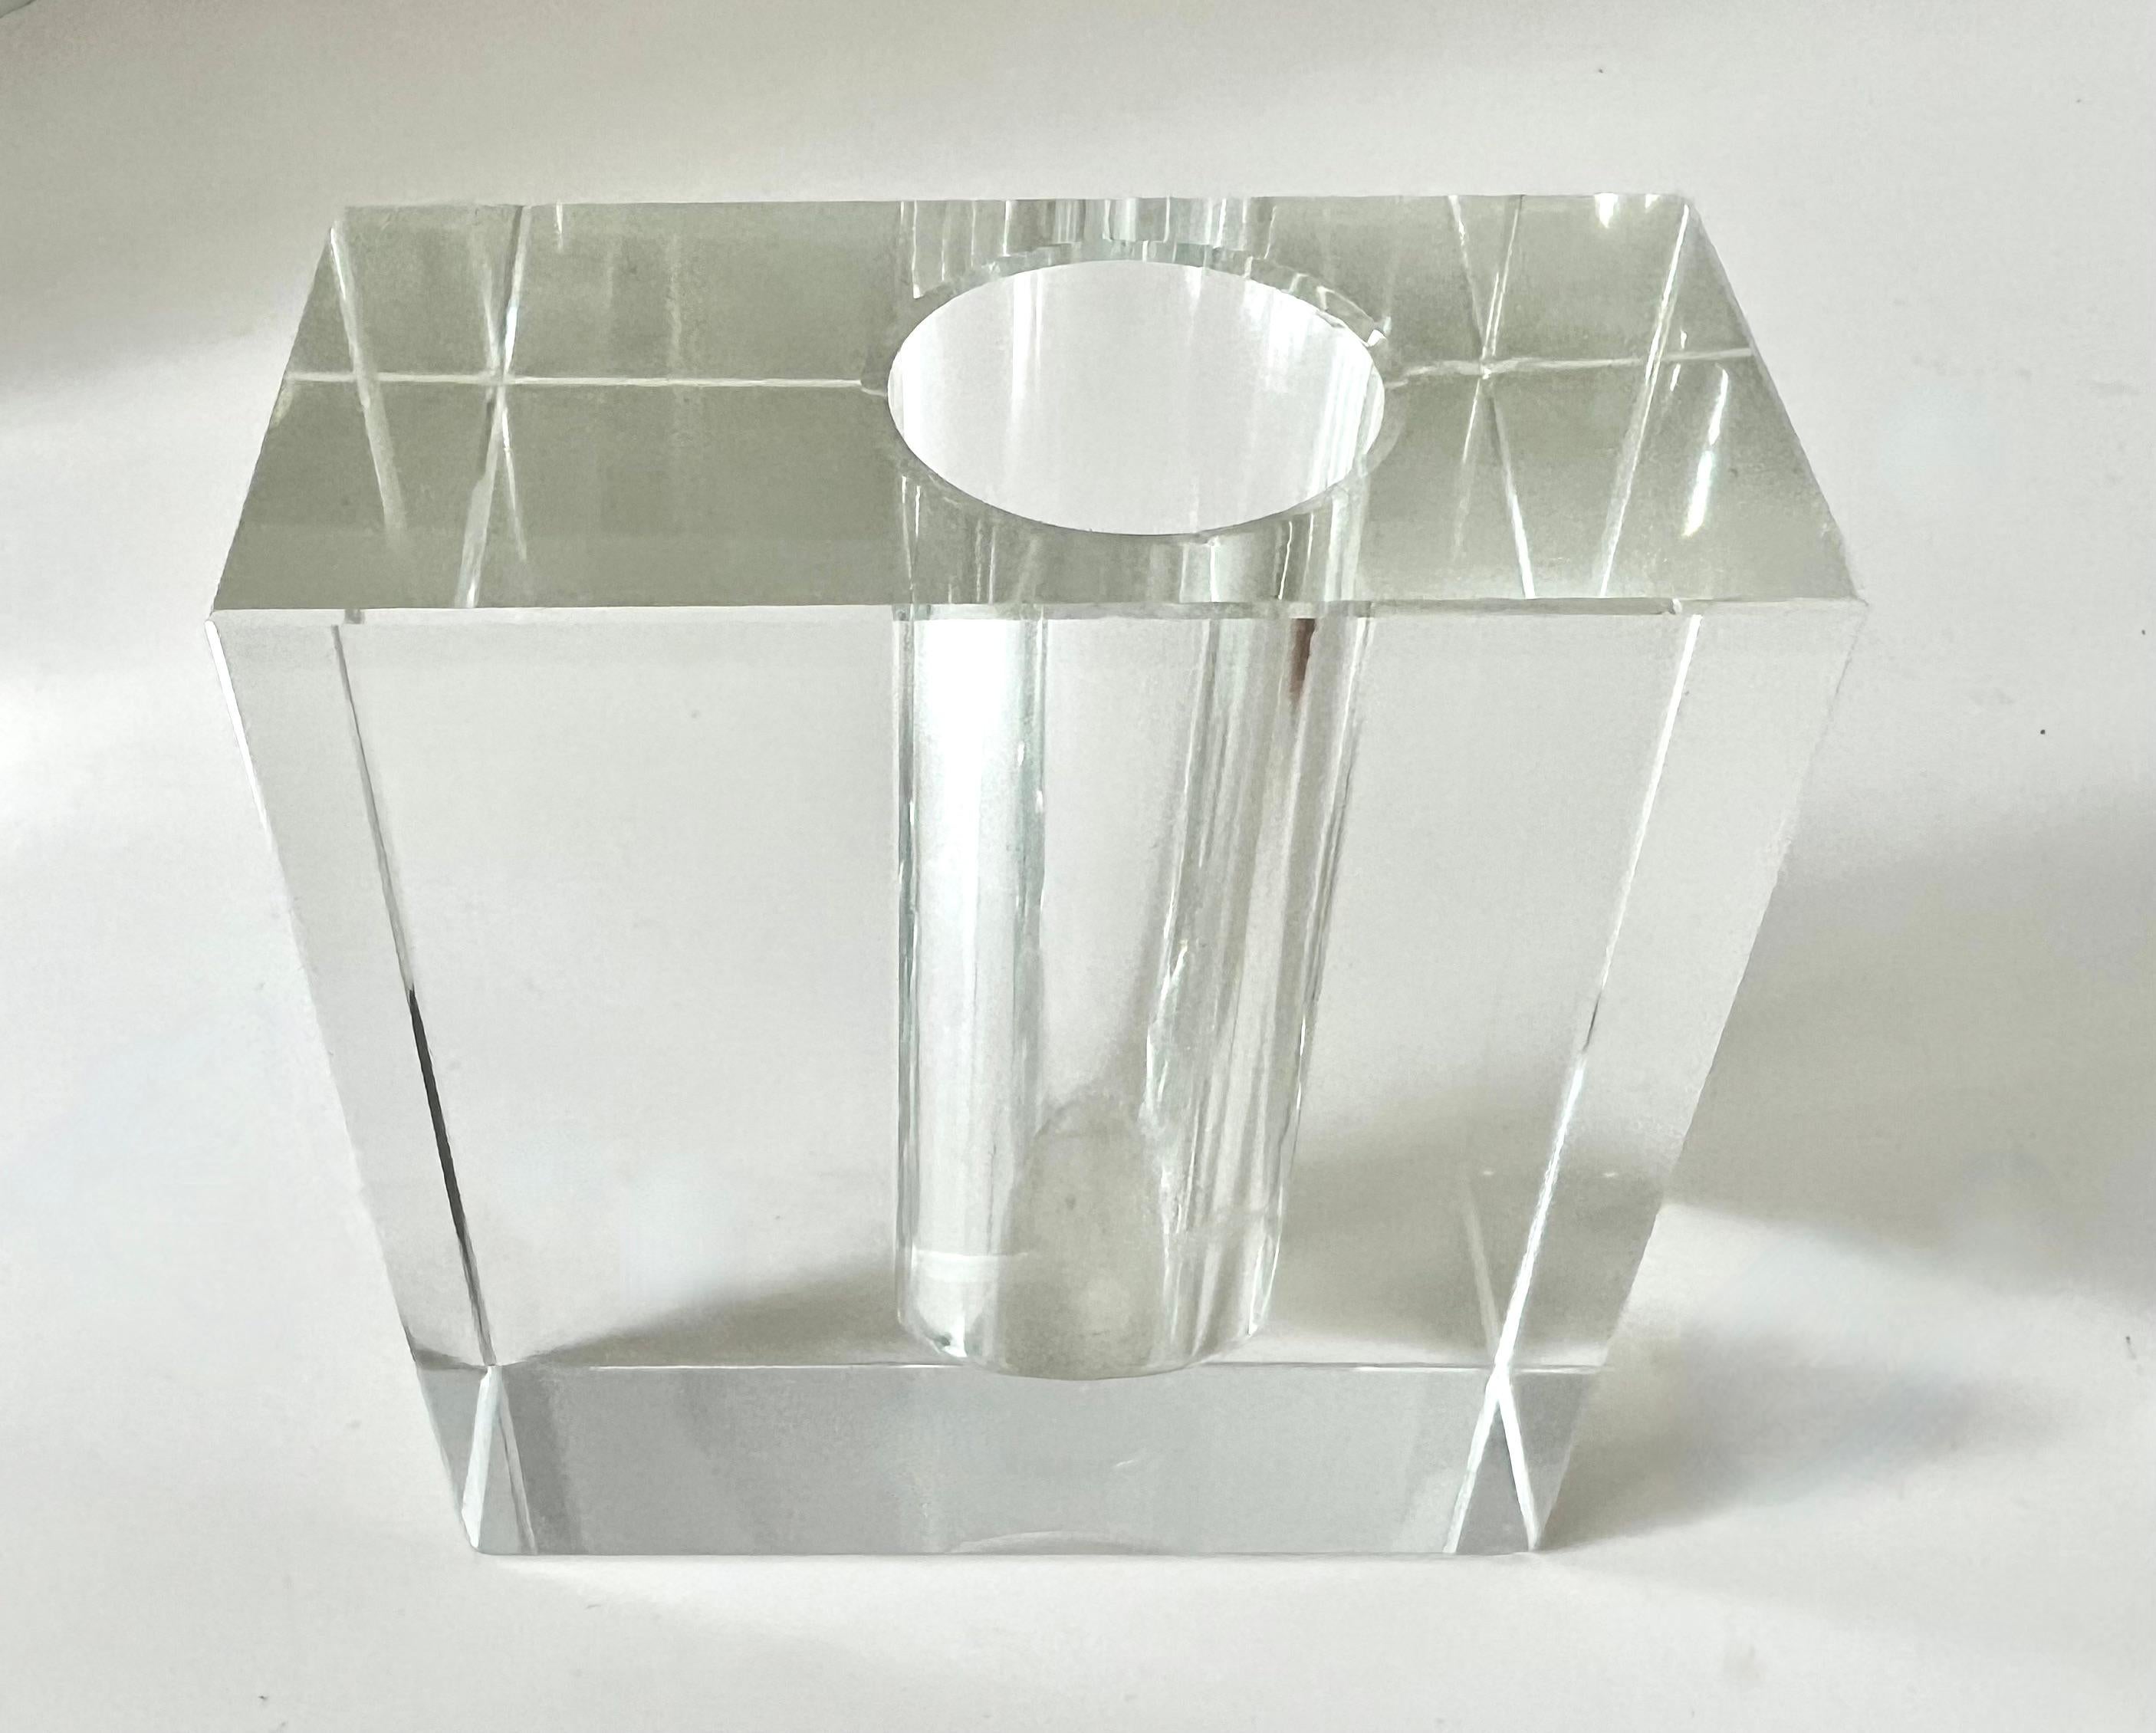 A simple, yet purely elegant and Architectural bud vase of solid crystal with a hole bore offset to hold a bud.

The form is the look here and the simple lines make this a hit with or without a bud inside.

A wonderful piece for the desk or work